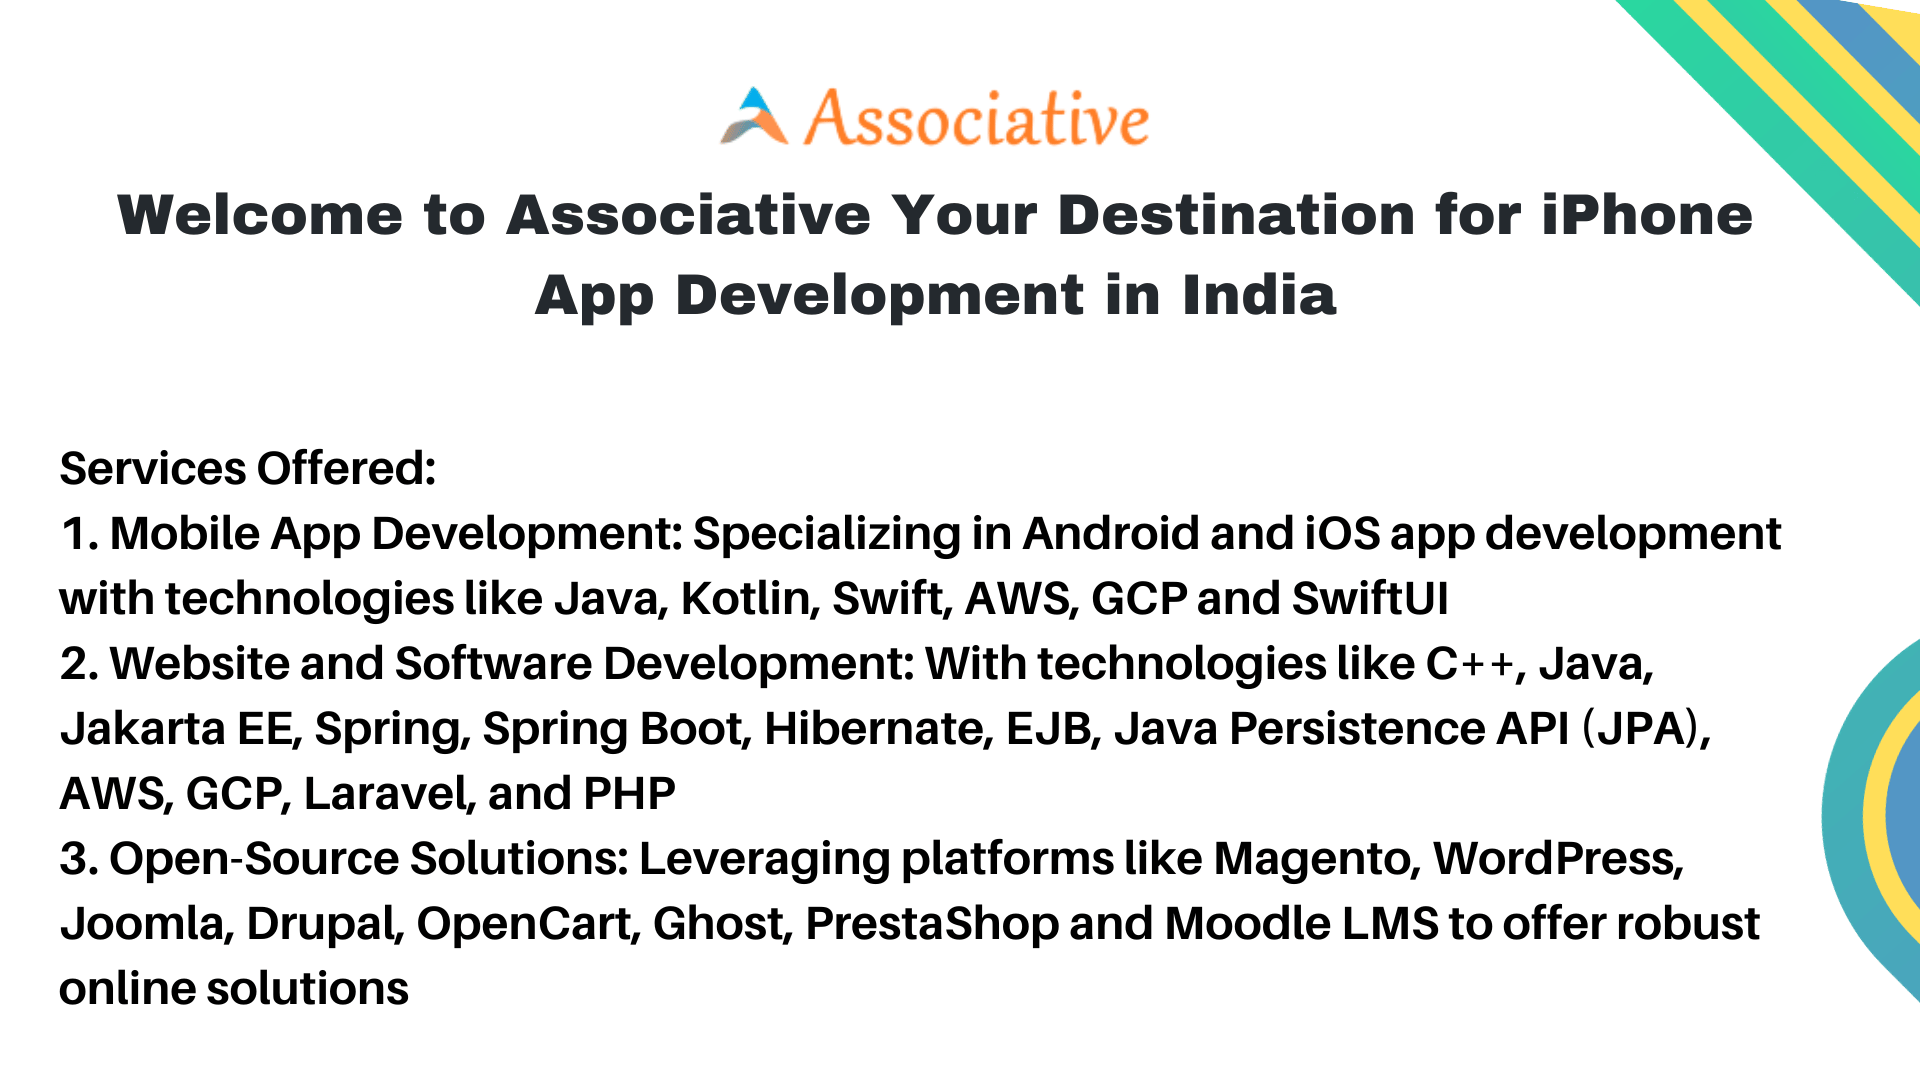 Welcome to Associative Your Destination for iPhone App Development in India